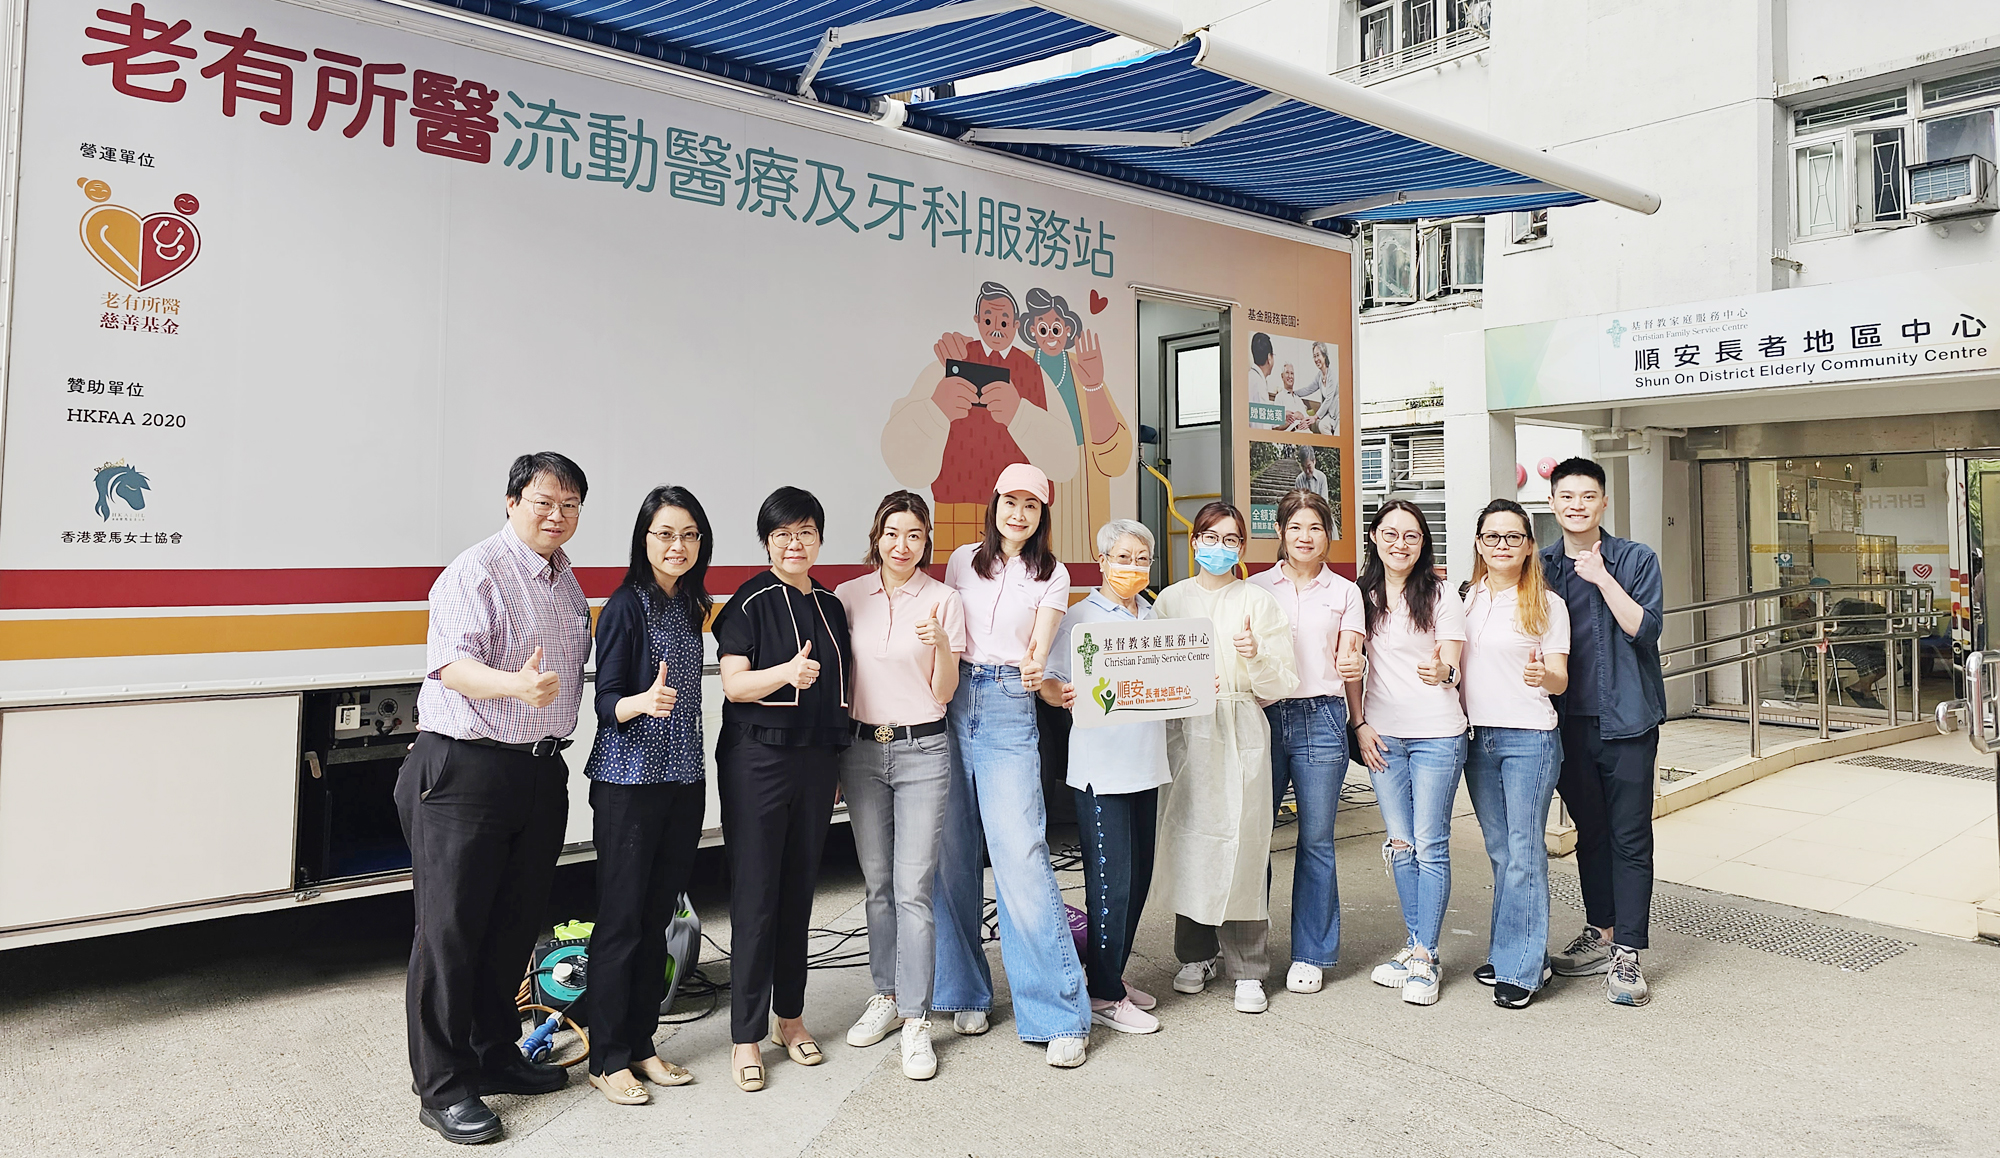 Free Medical Consultation Day in Shun On District Elderly Community Centre